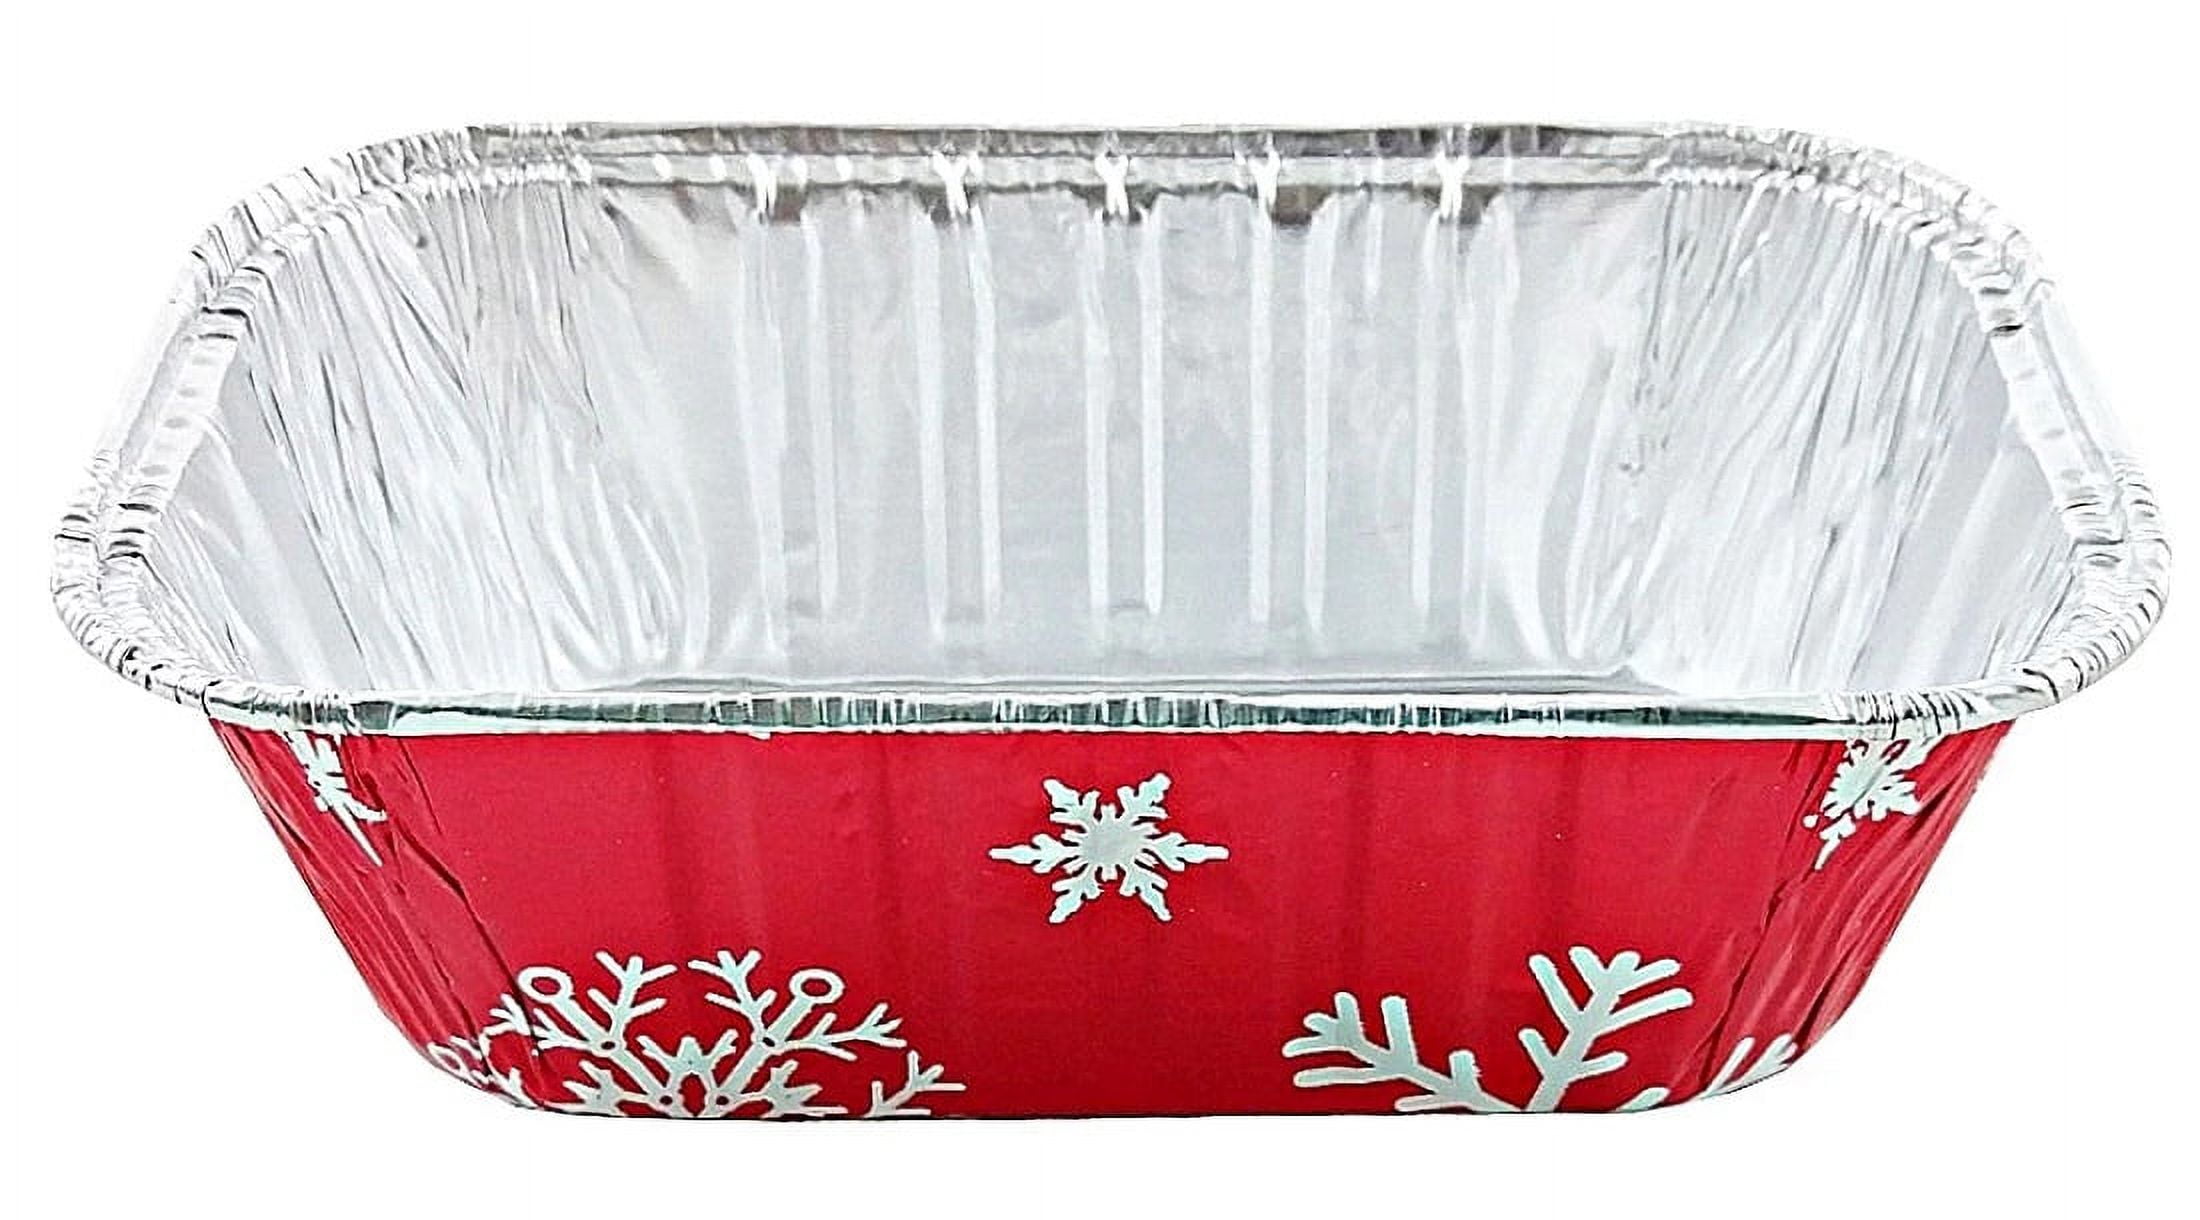 KitchenDance Disposable Aluminum Holiday 1 Lb Mini Loaf Pan with Clear Snap  on Lid - 15 Ounces Aluminum Foil Pan for Baking, 9302X, (Red & Silver, 10)